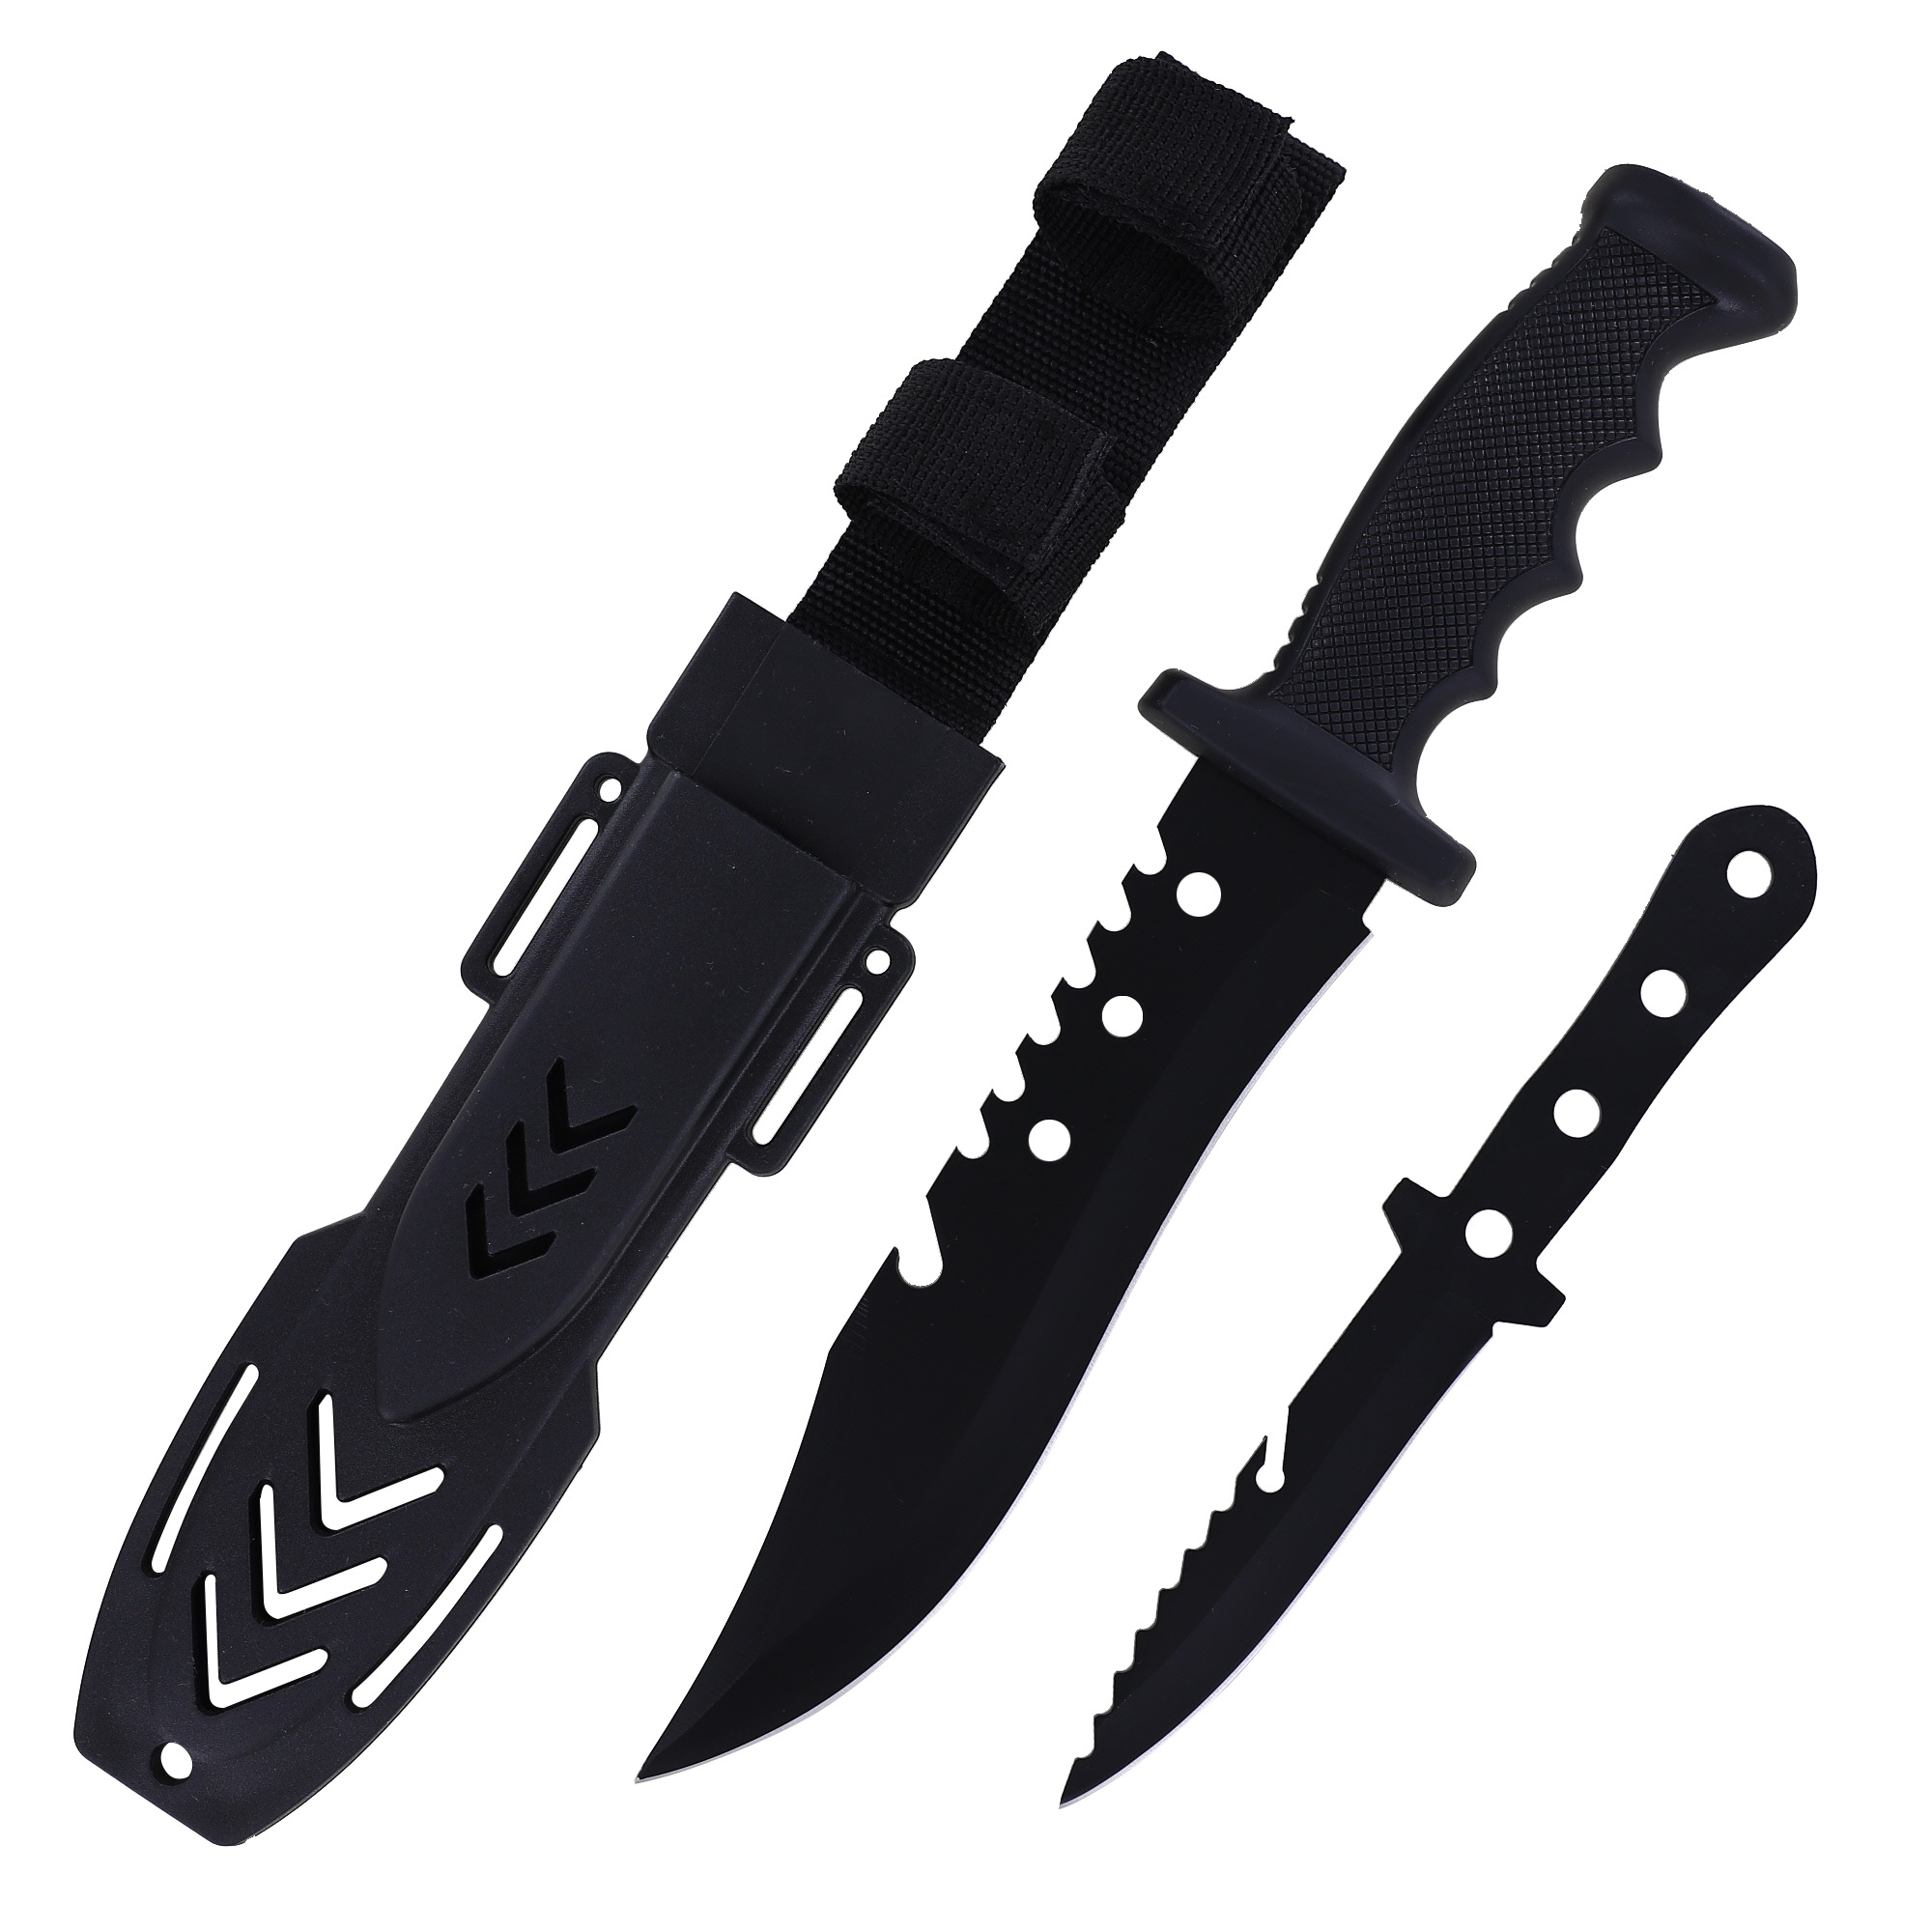 So Below Tactical Hunting Outdoor SURVIVAL KNIFE Set